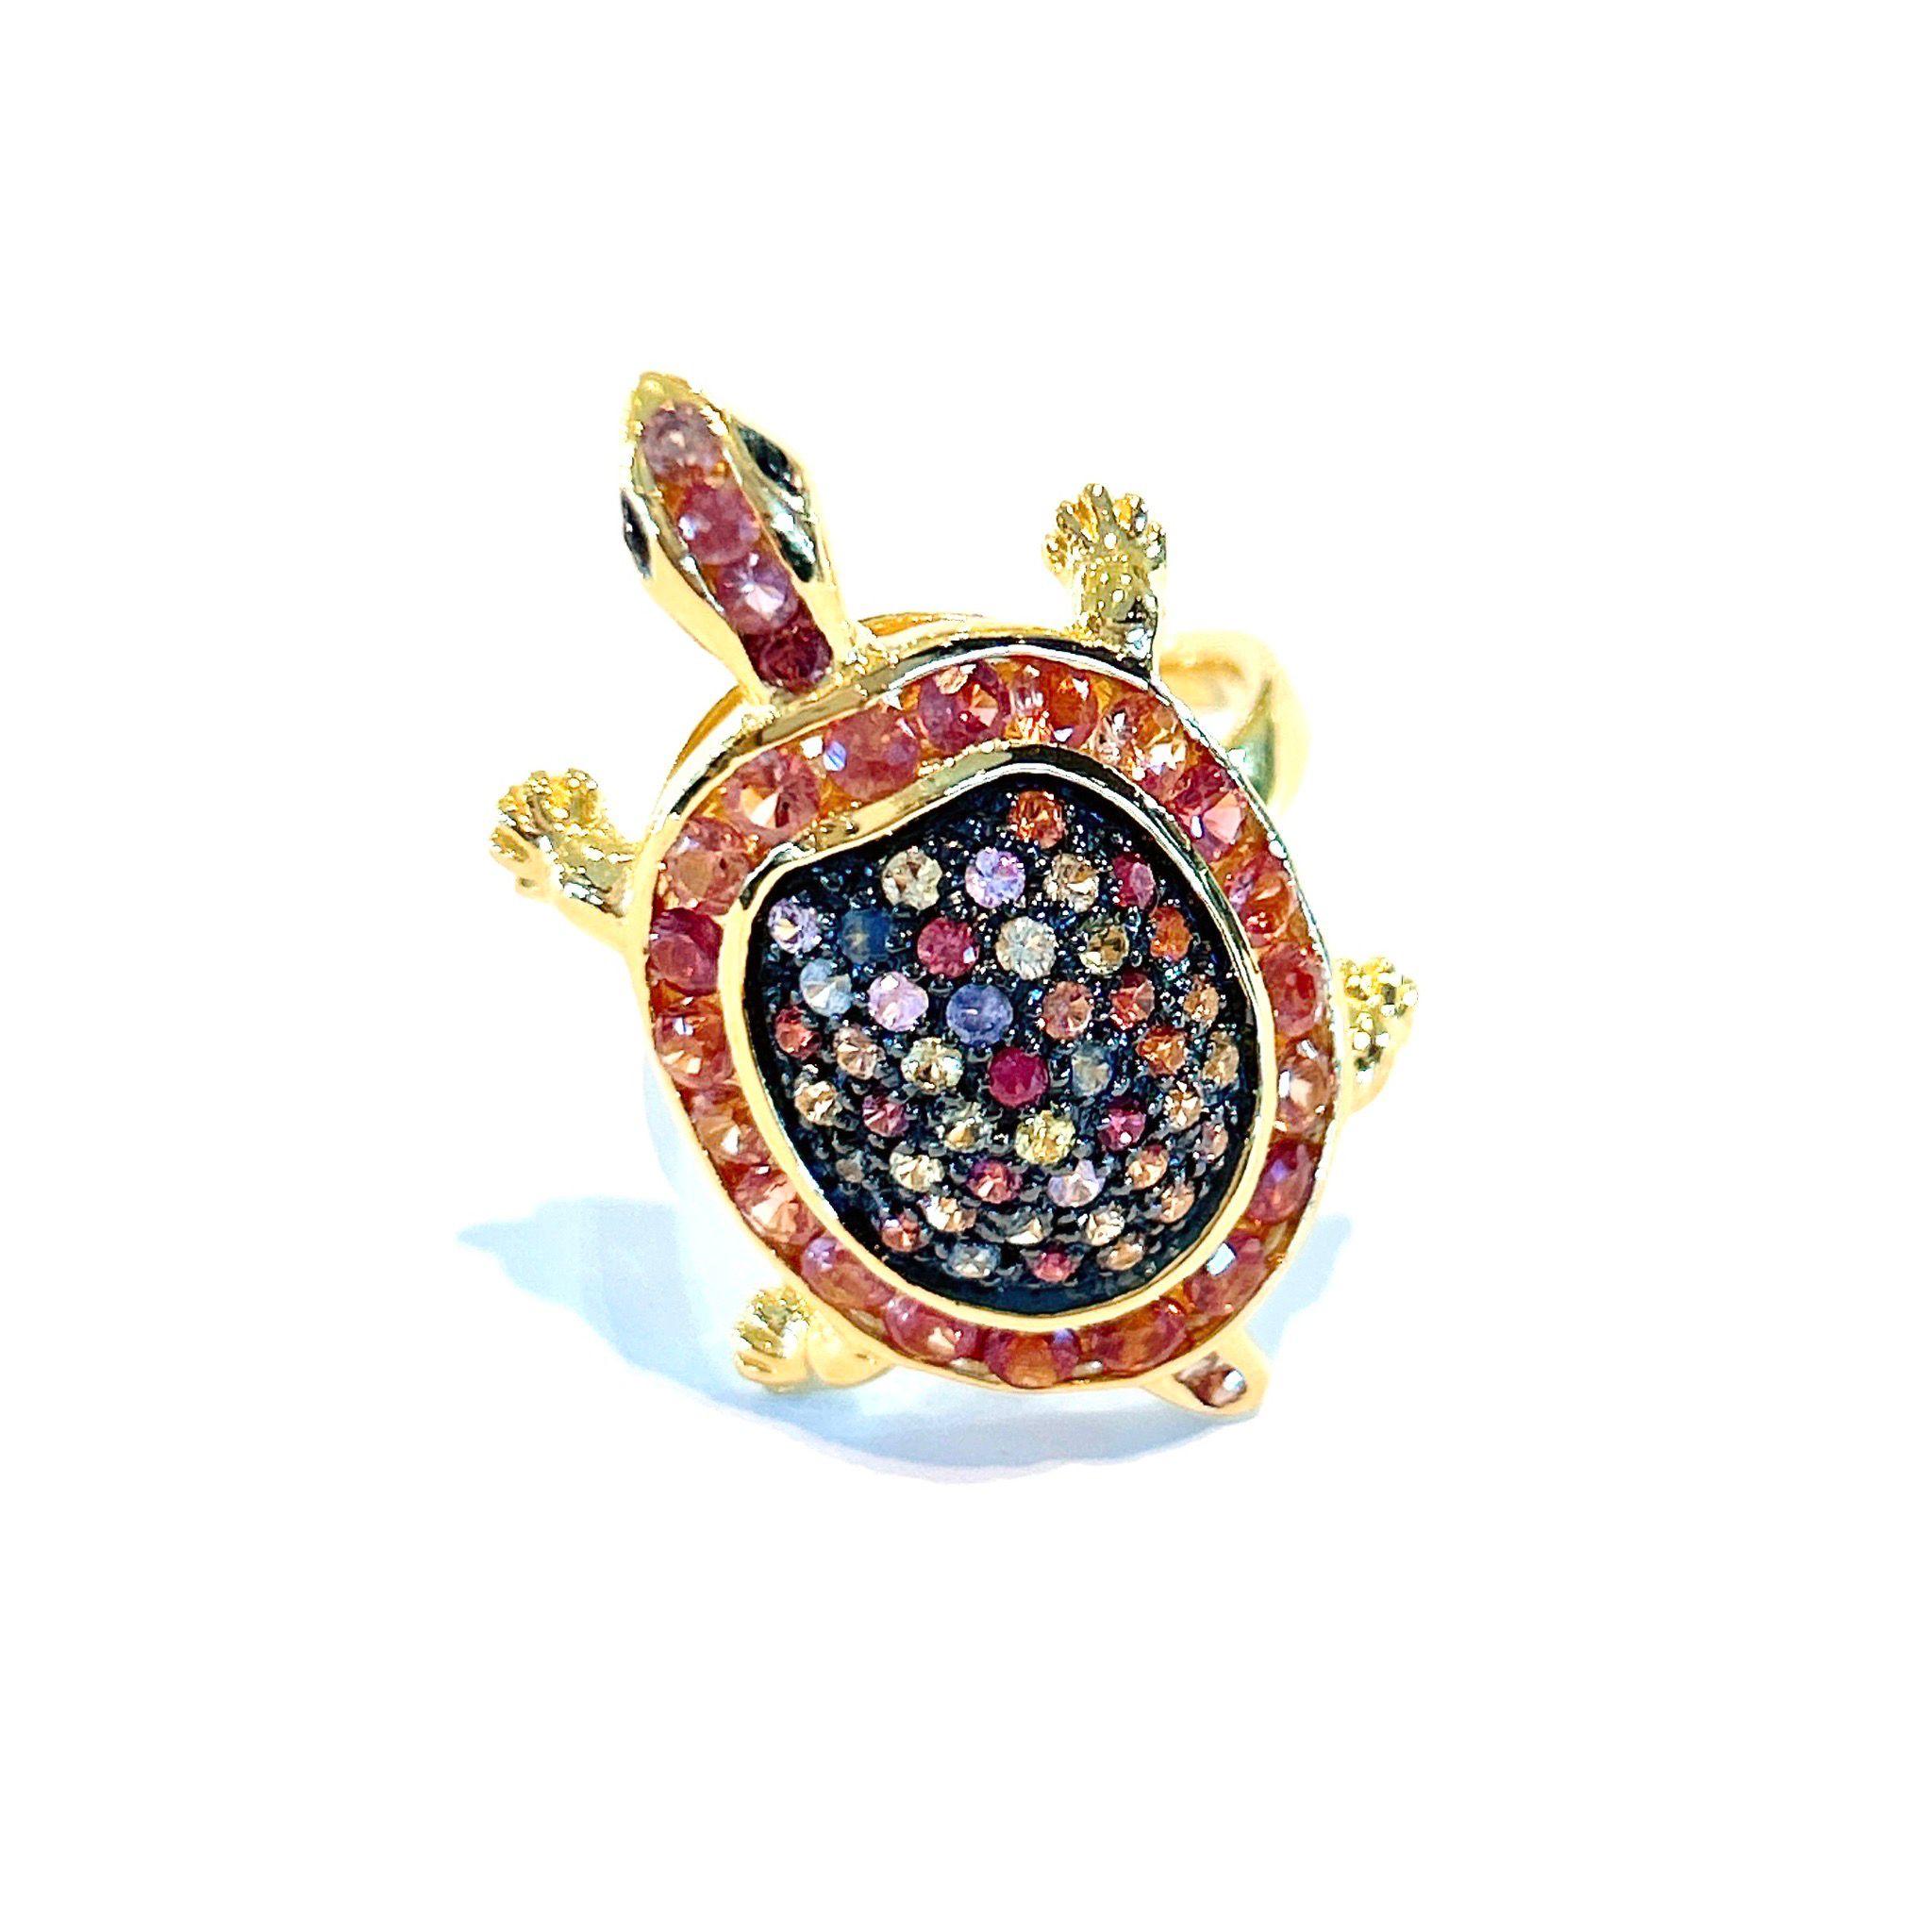 Bochic “Orient” Cocktail Ring 
Natural Beautiful Sri Lankan Sapphires - 11 carats
Shape - Round brilliant 
Colors - Orange, Green, Rose, Blue, Red, Pinl
Set in 22K Gold and Silver 950
This Ring is perfect to wear - Day to night, swim wear to evening